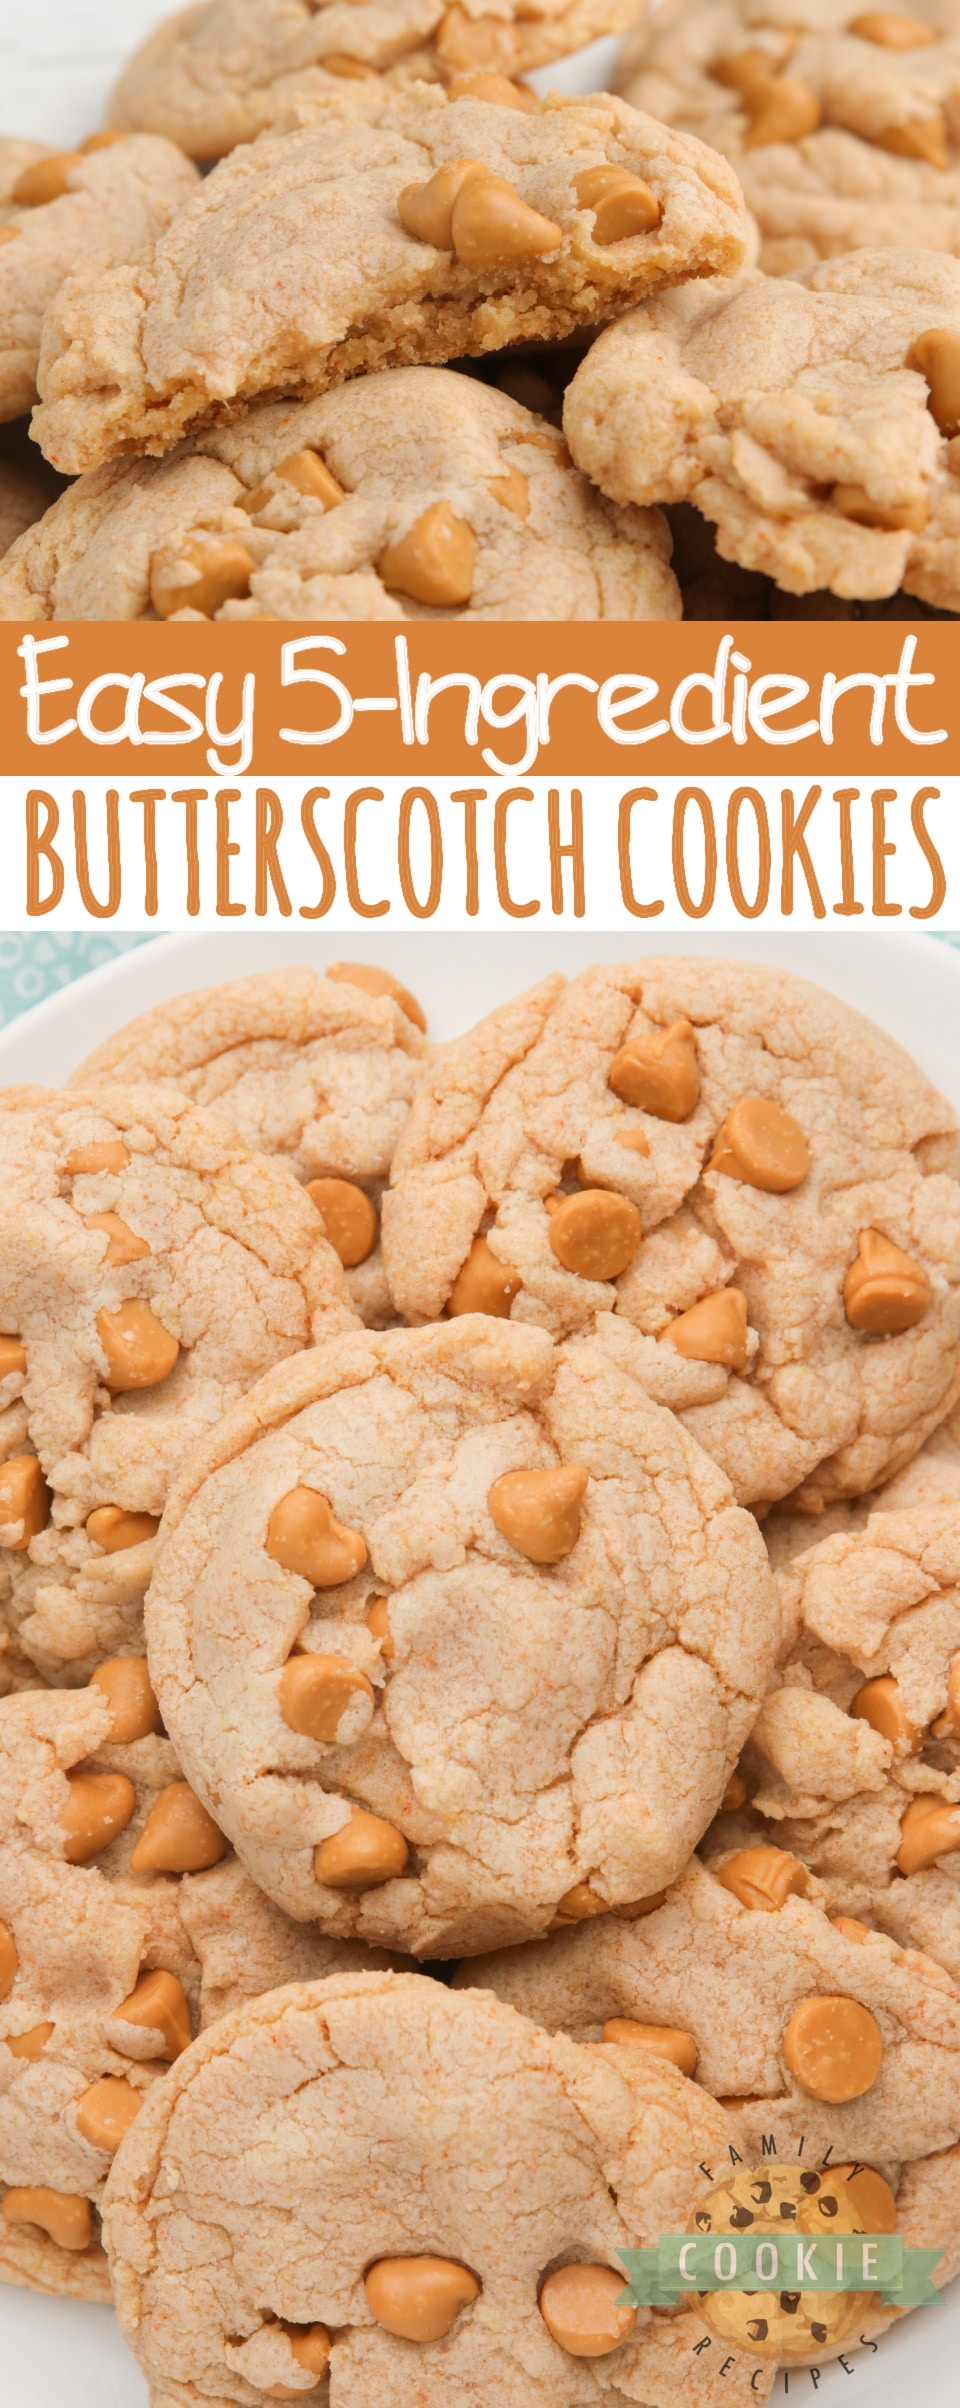 Easy Butterscotch Cookies made with a sugar cookie mix and butterscotch pudding. Only 5 ingredients needed for these delicious cookies that are soft, chewy and packed with tons of butterscotch flavor! 